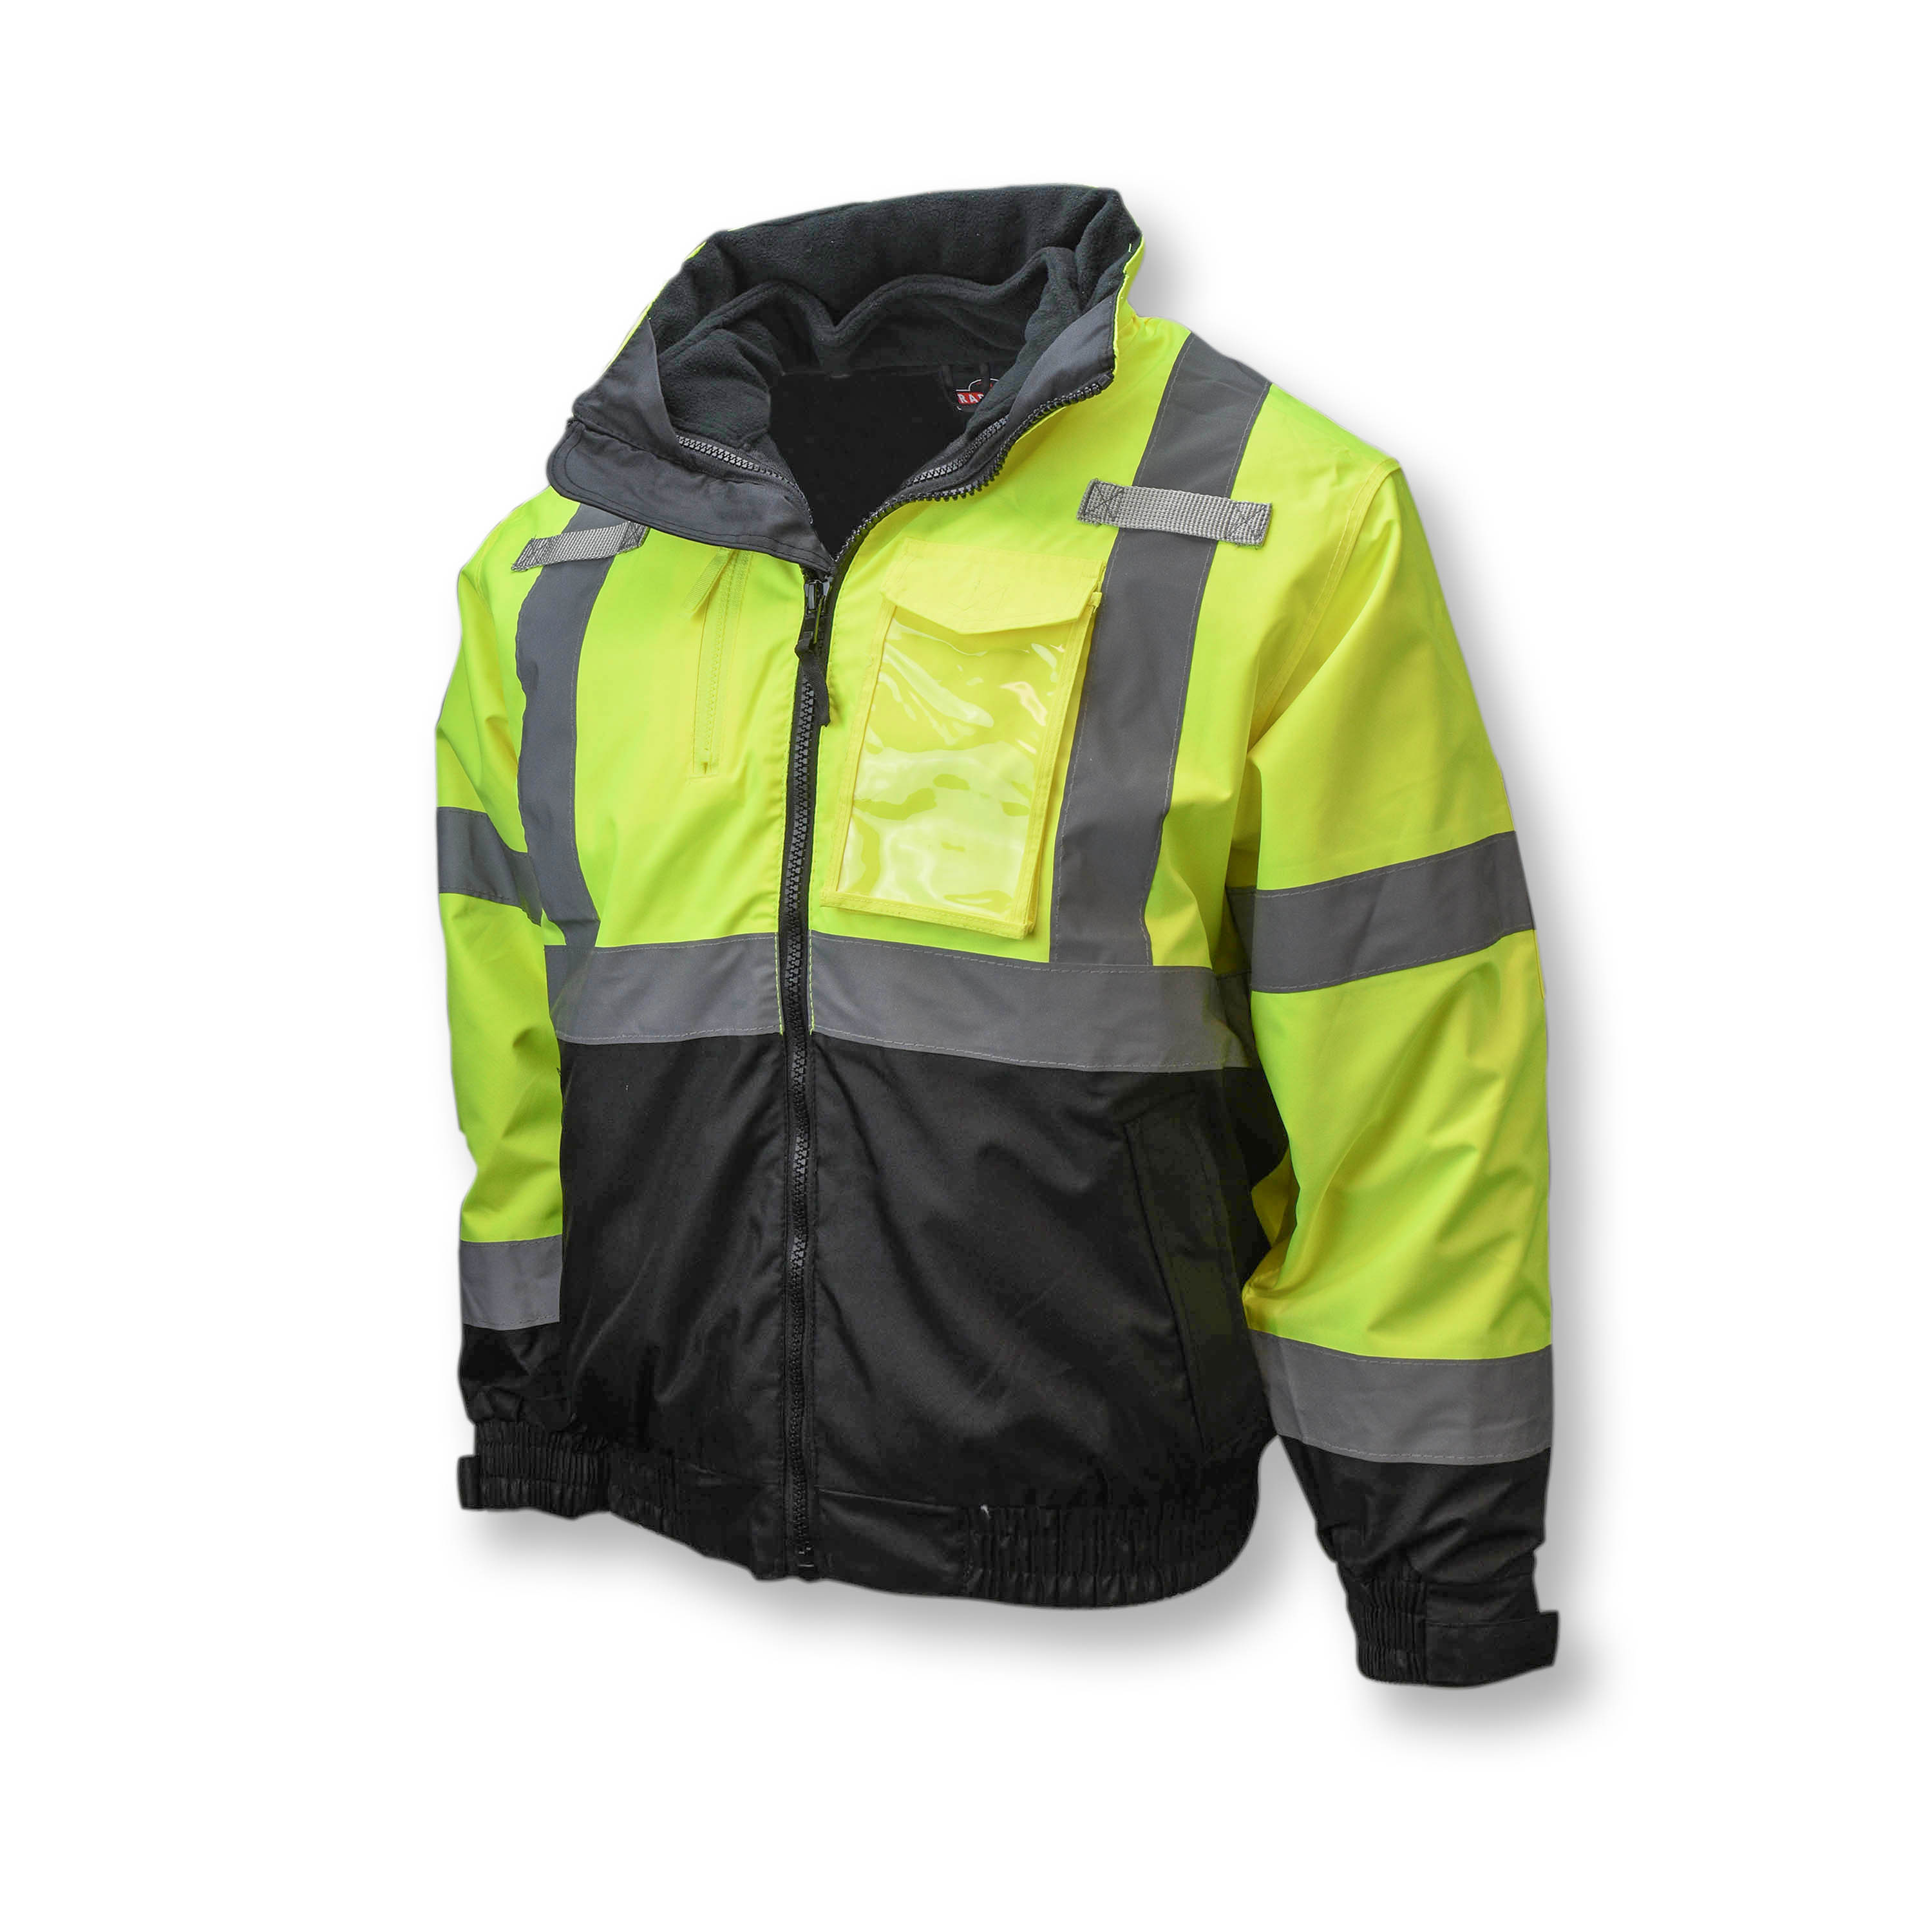 SJ210B Three-in-One Deluxe High Visibility Bomber Jacket - Green/Black Bottom - Size XL